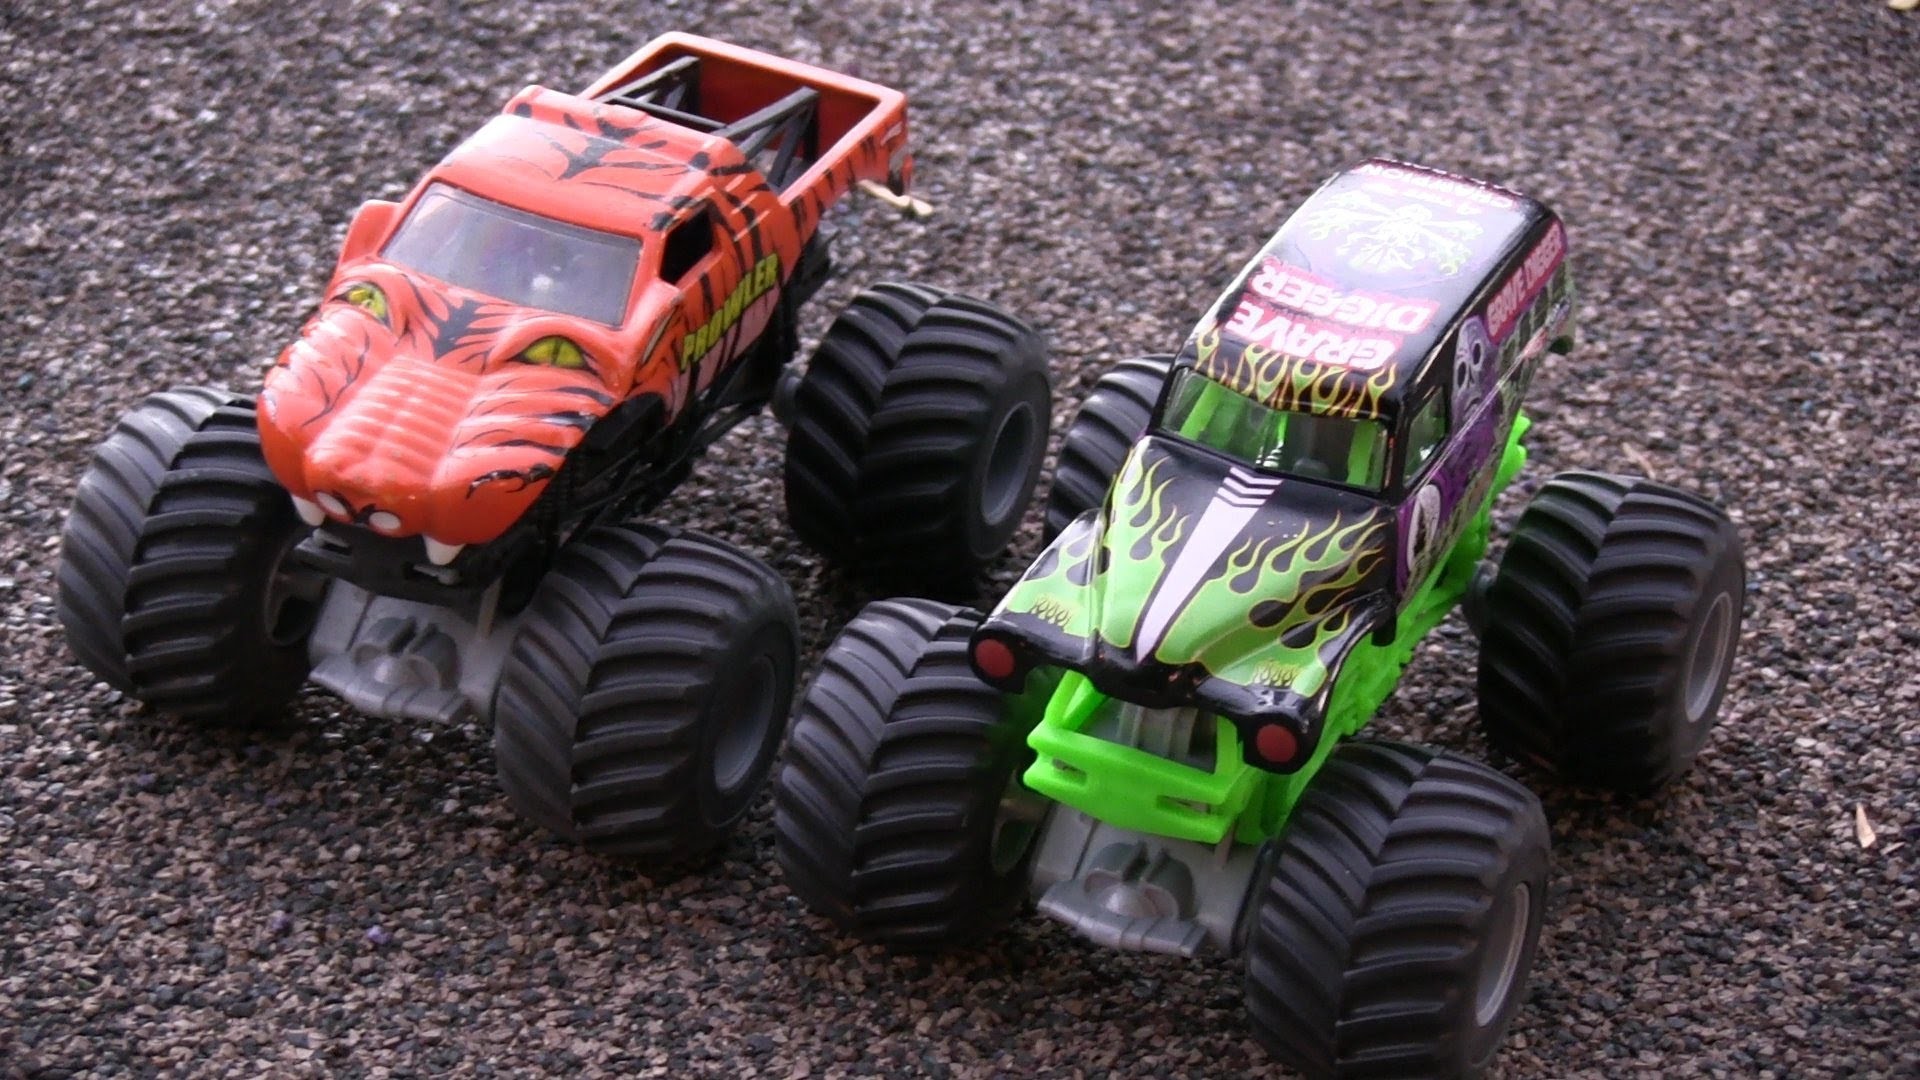 1920x1080 Playing His Monster Jam Trucks' Grave Digger and Prowler in the Sand :-) -  YouTube